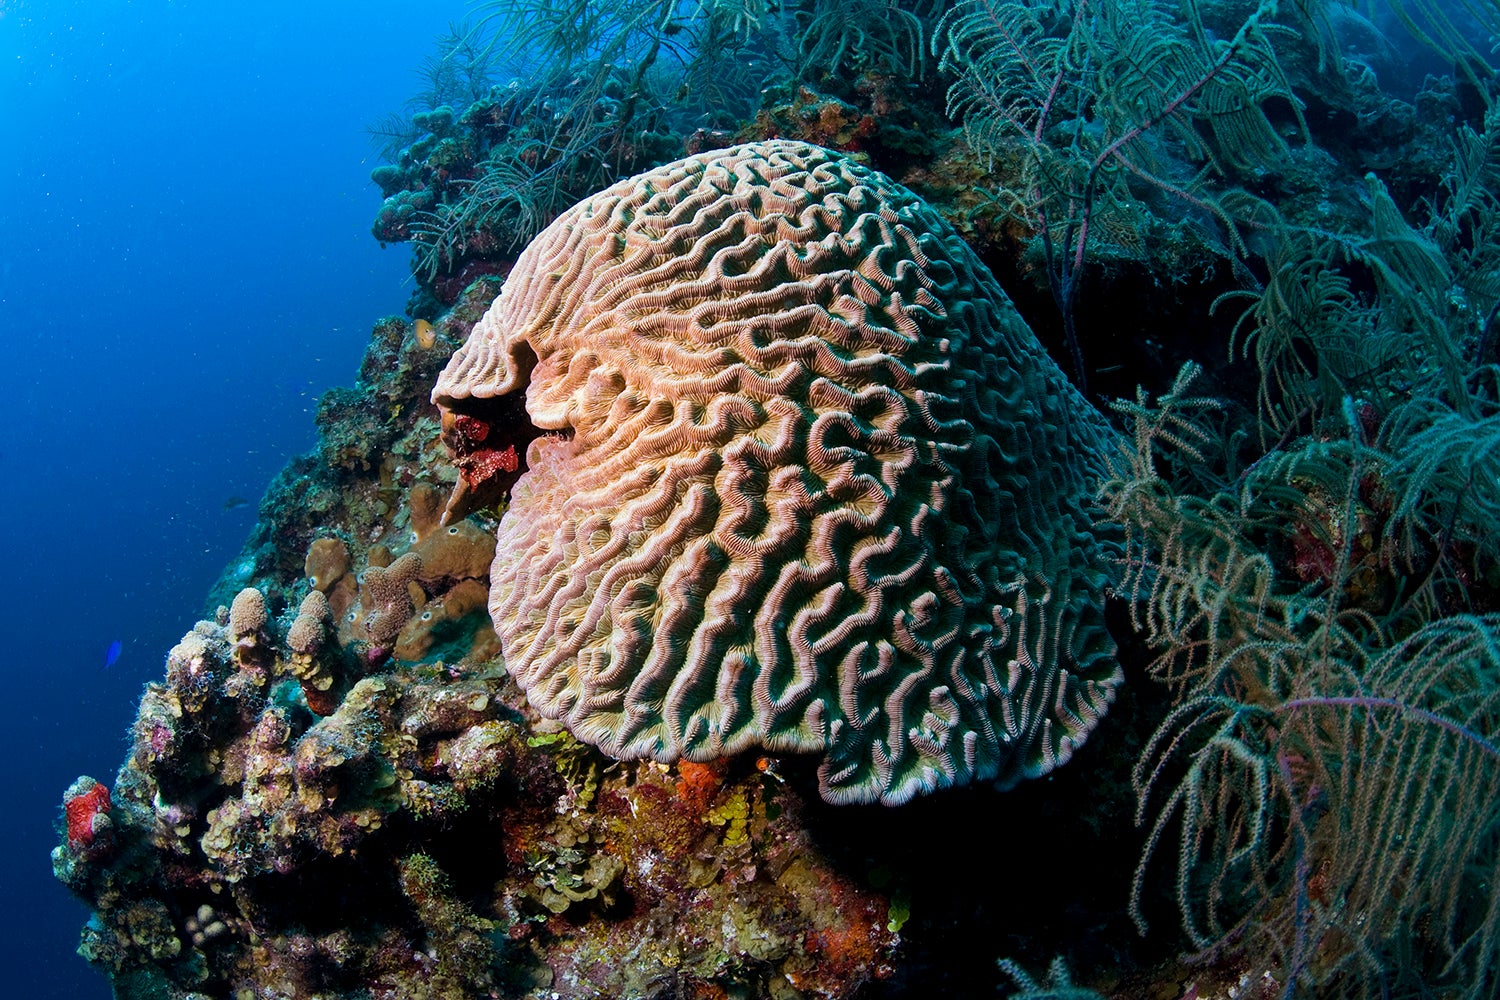 Planning for healthy corals and communities